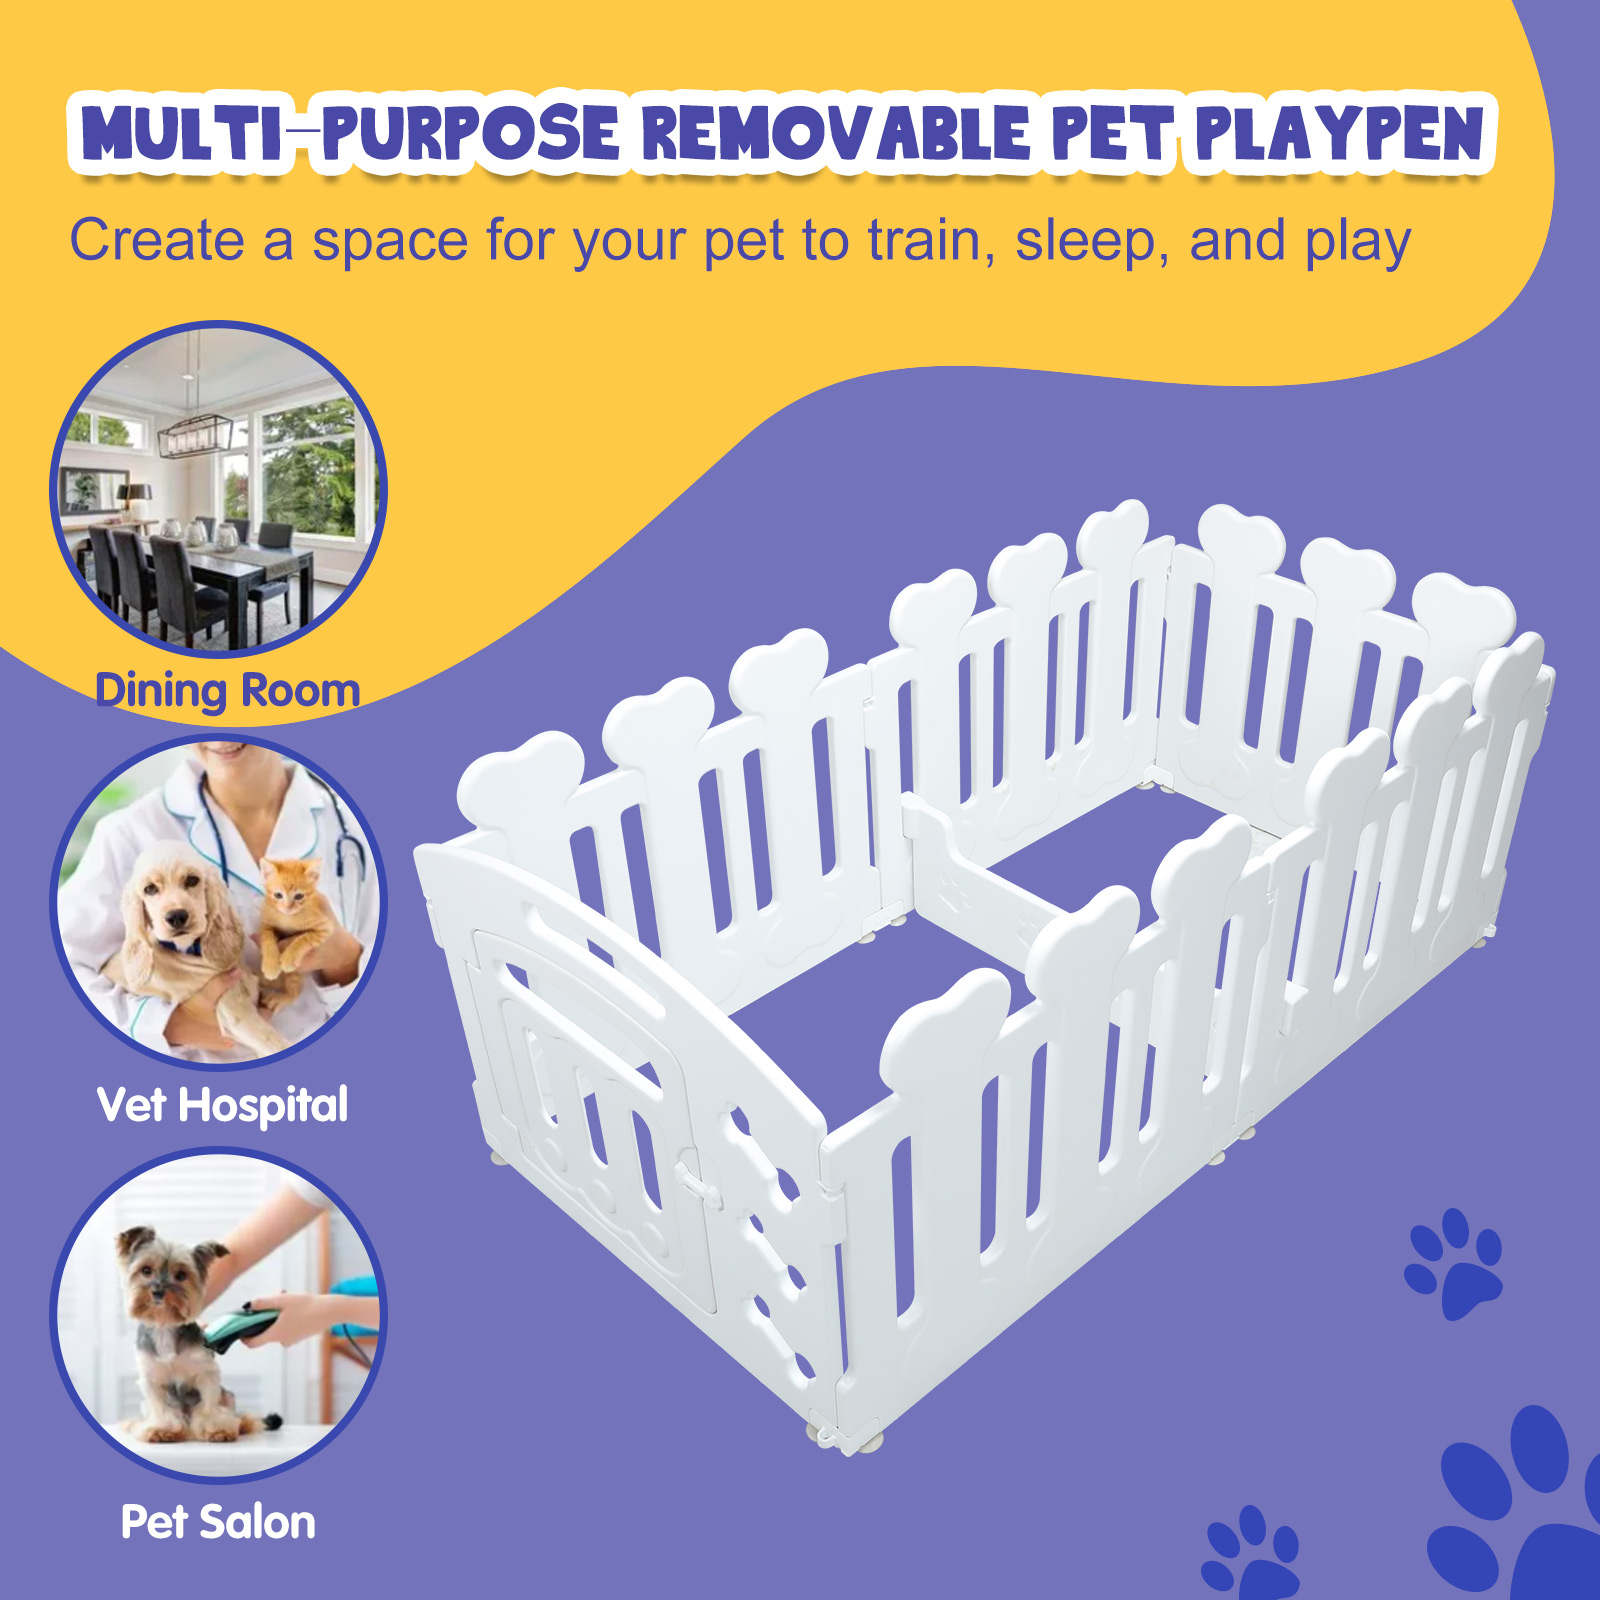 Dog Crate Pet Pen Cage Playpen Enclosure Puppy Kennel Outdoor Indoor Cat Exercise Whelping Box Plastic Portable White